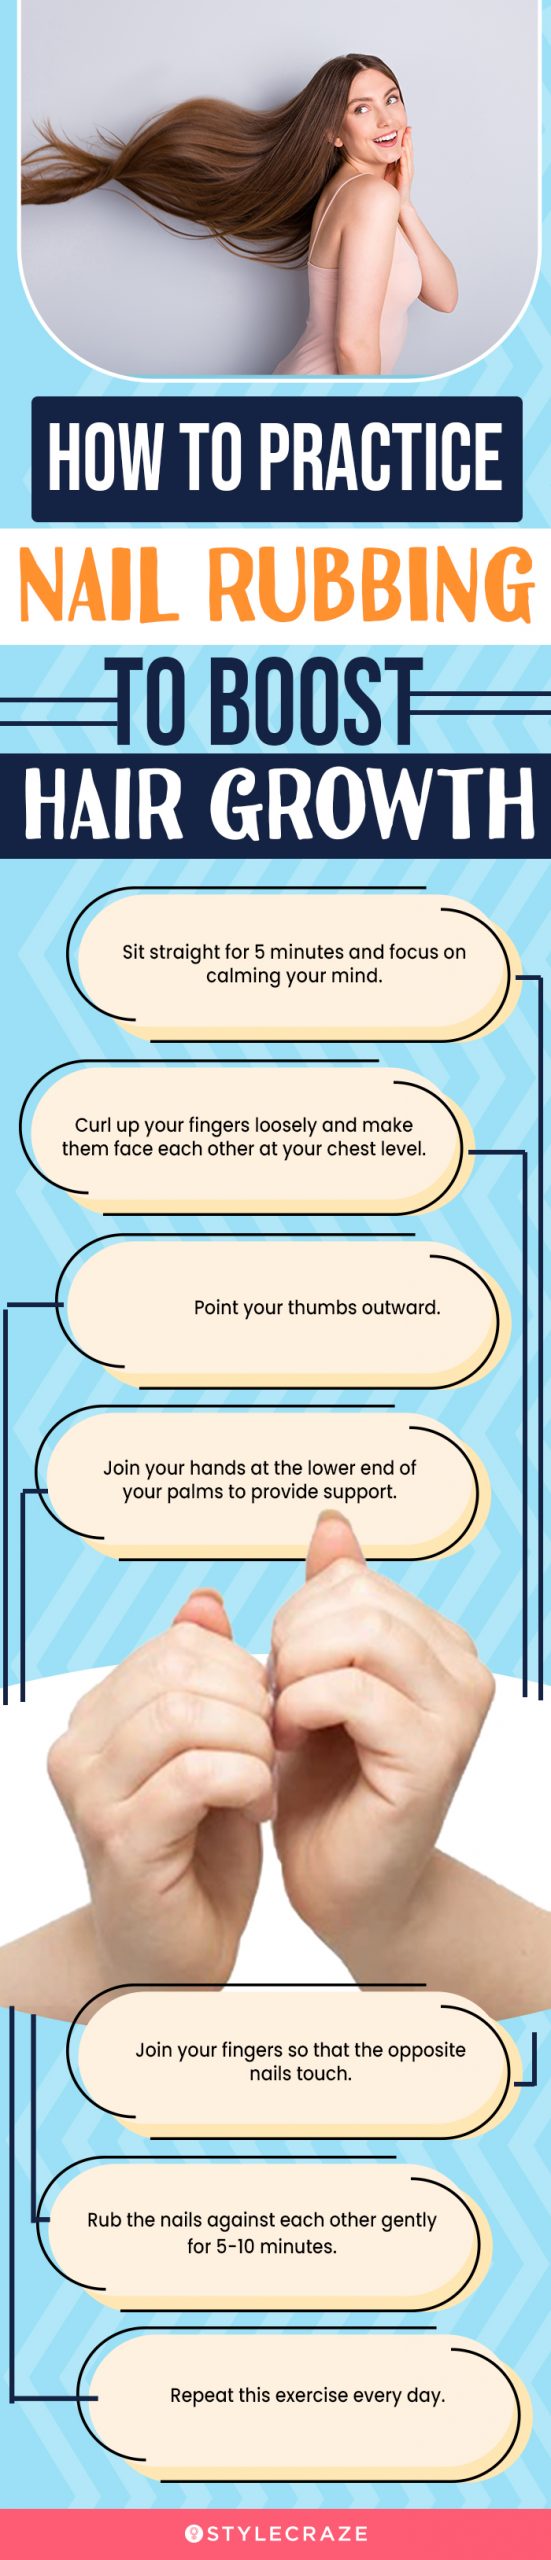 how to practice nail rubbing to boost hair growth (infographic)